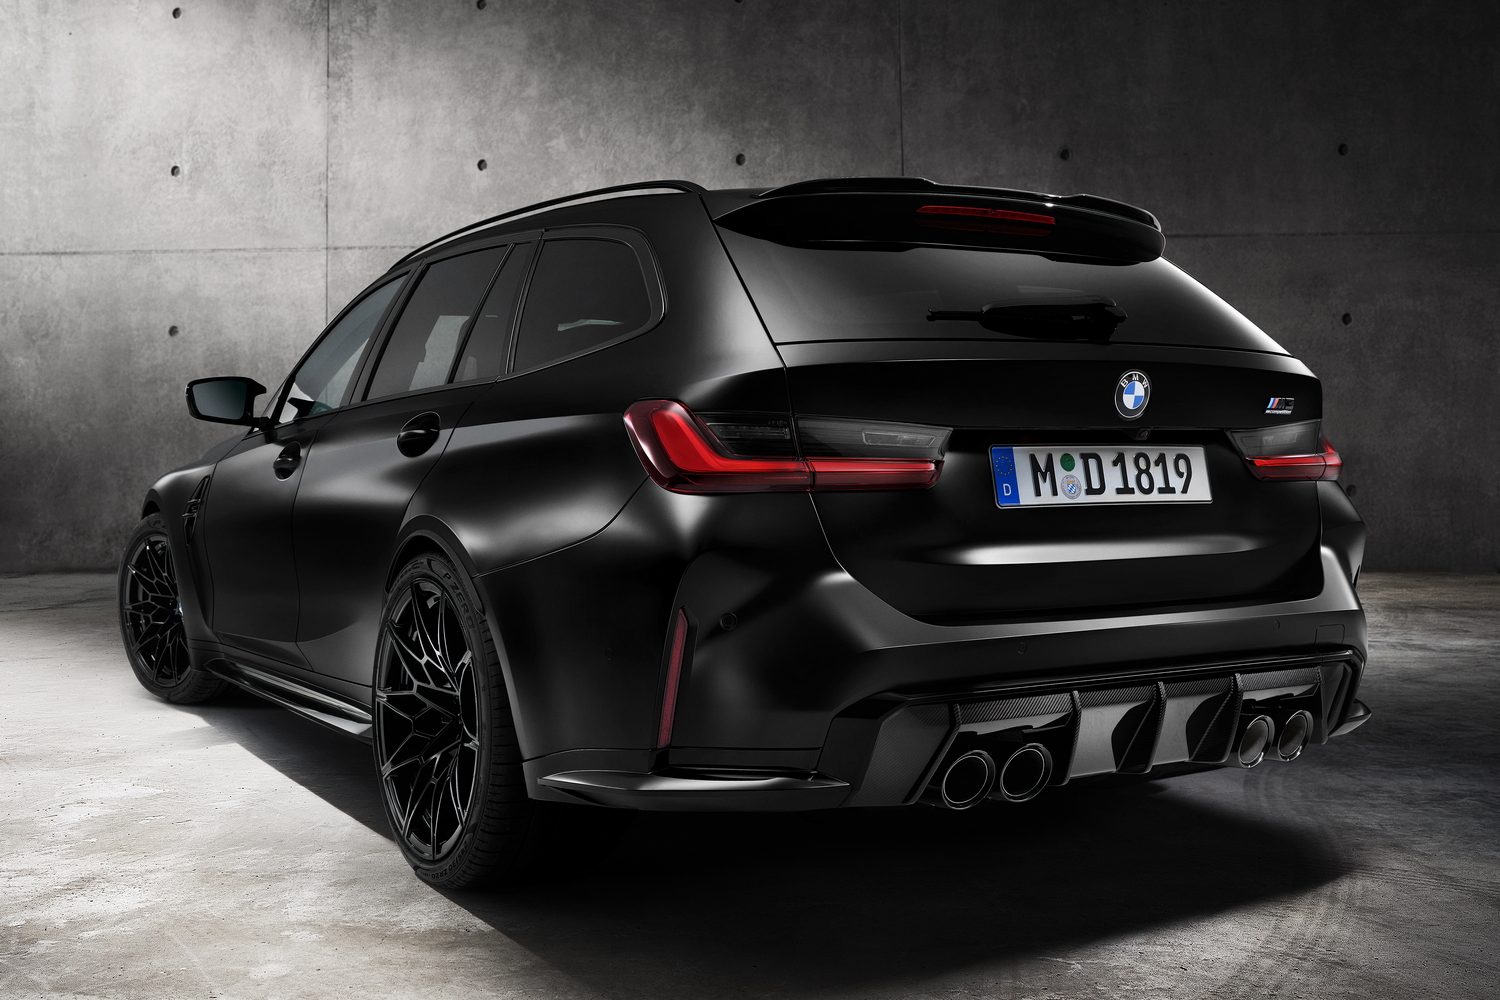 BMW M3 Touring in all its glory